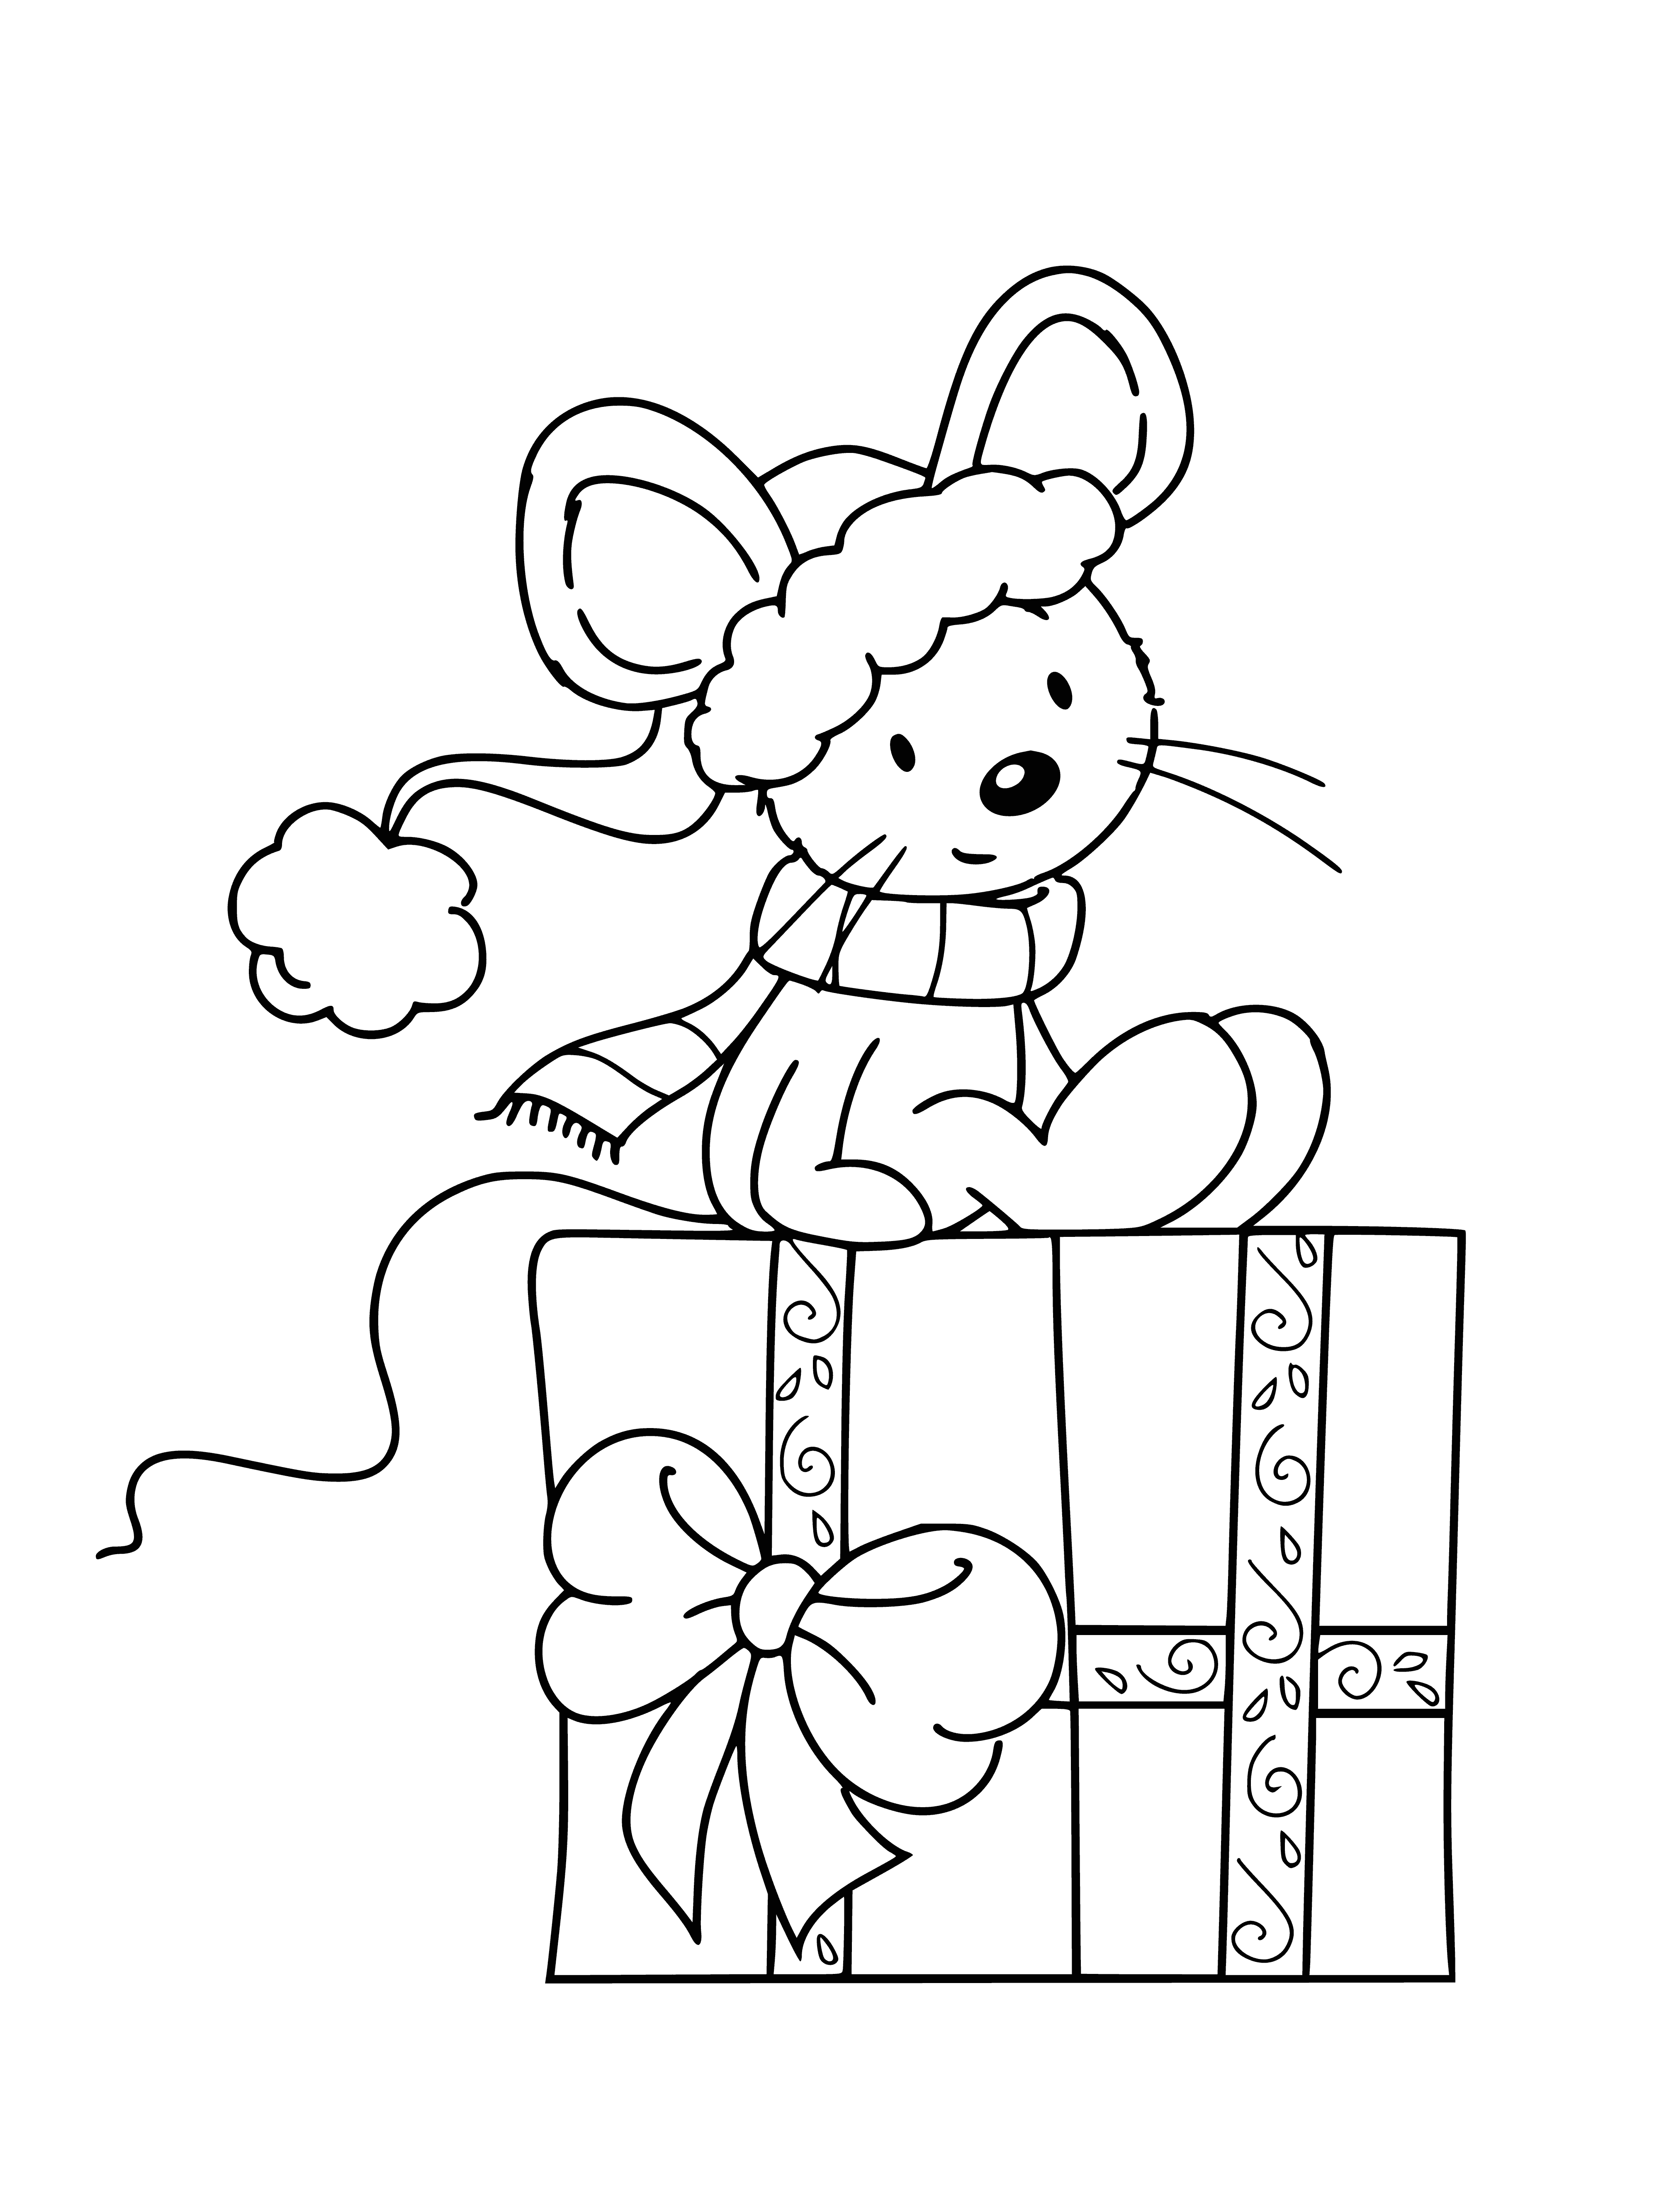 coloring page: Large rat & small mouse bear gifts, cheerfully seated facing each other with open mouths as if laughing or singing.